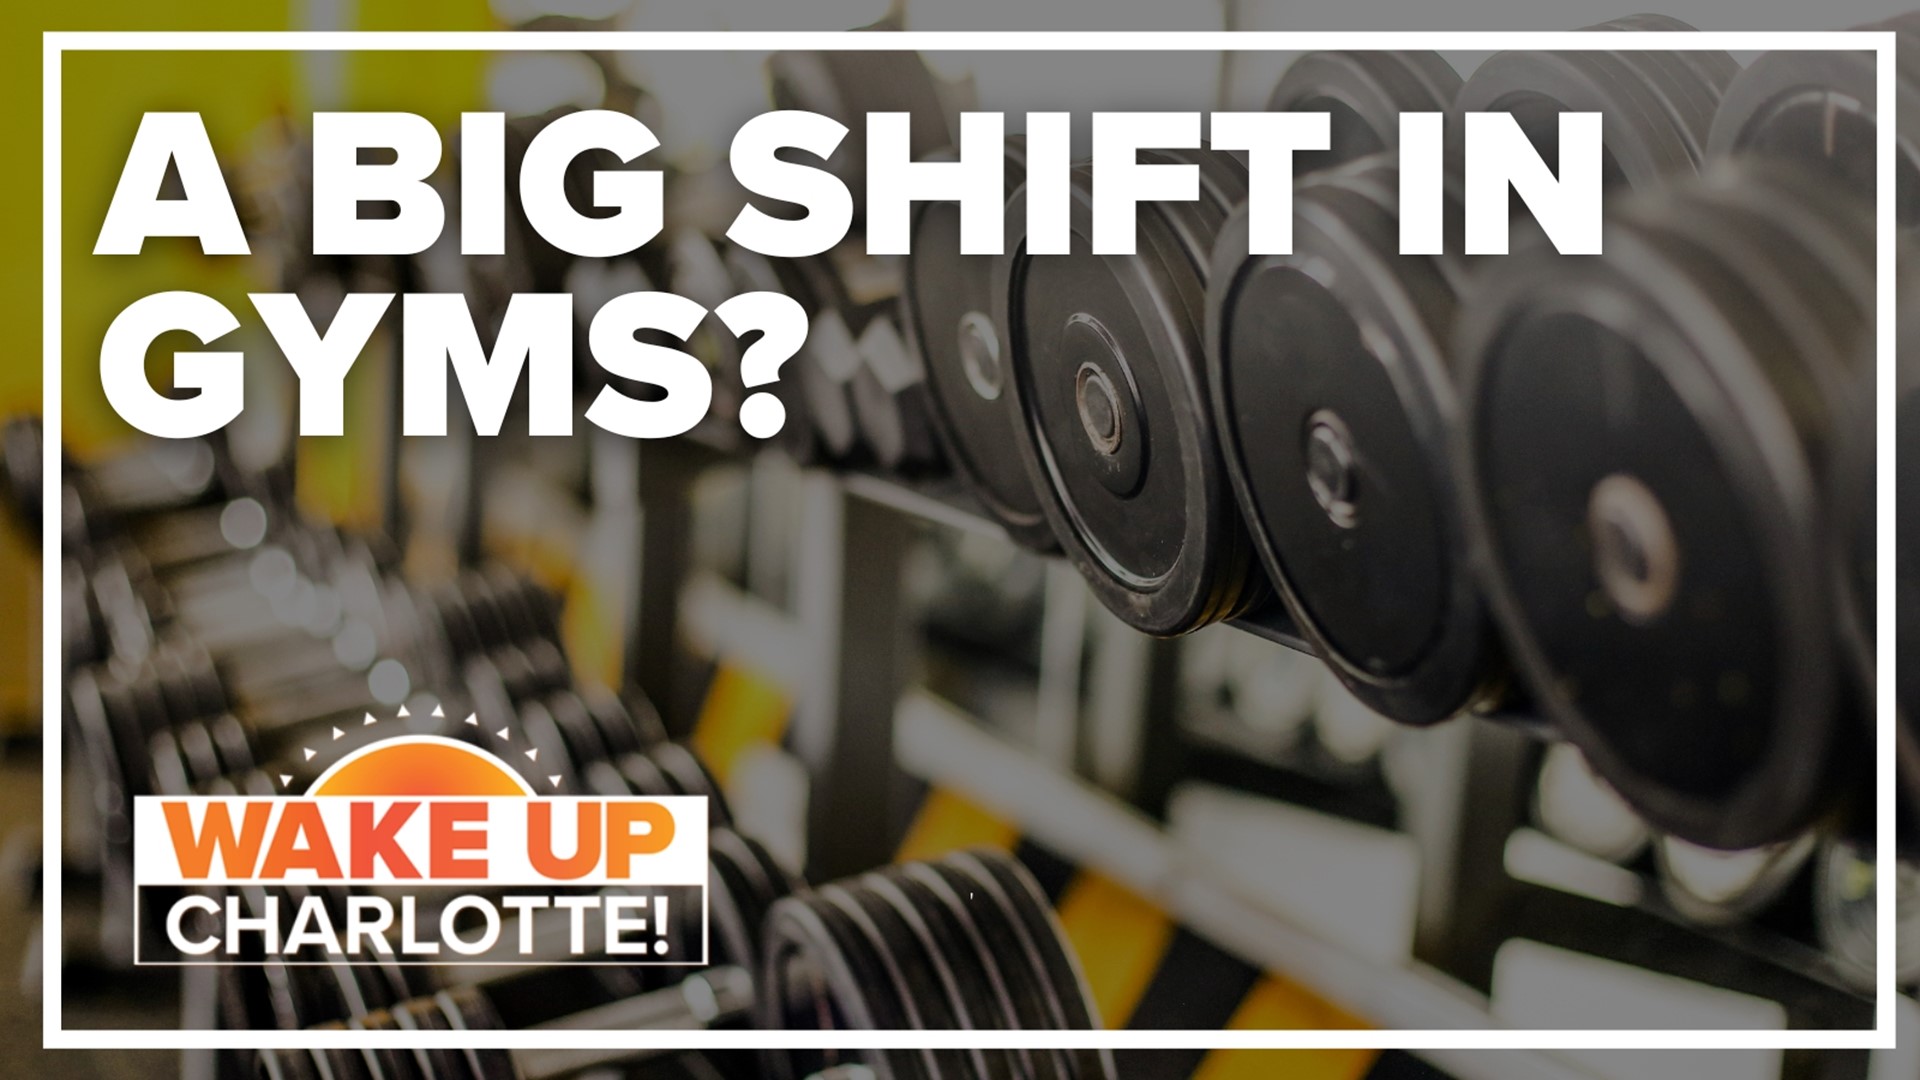 Say goodbye to treadmills and hello to dumbbells.